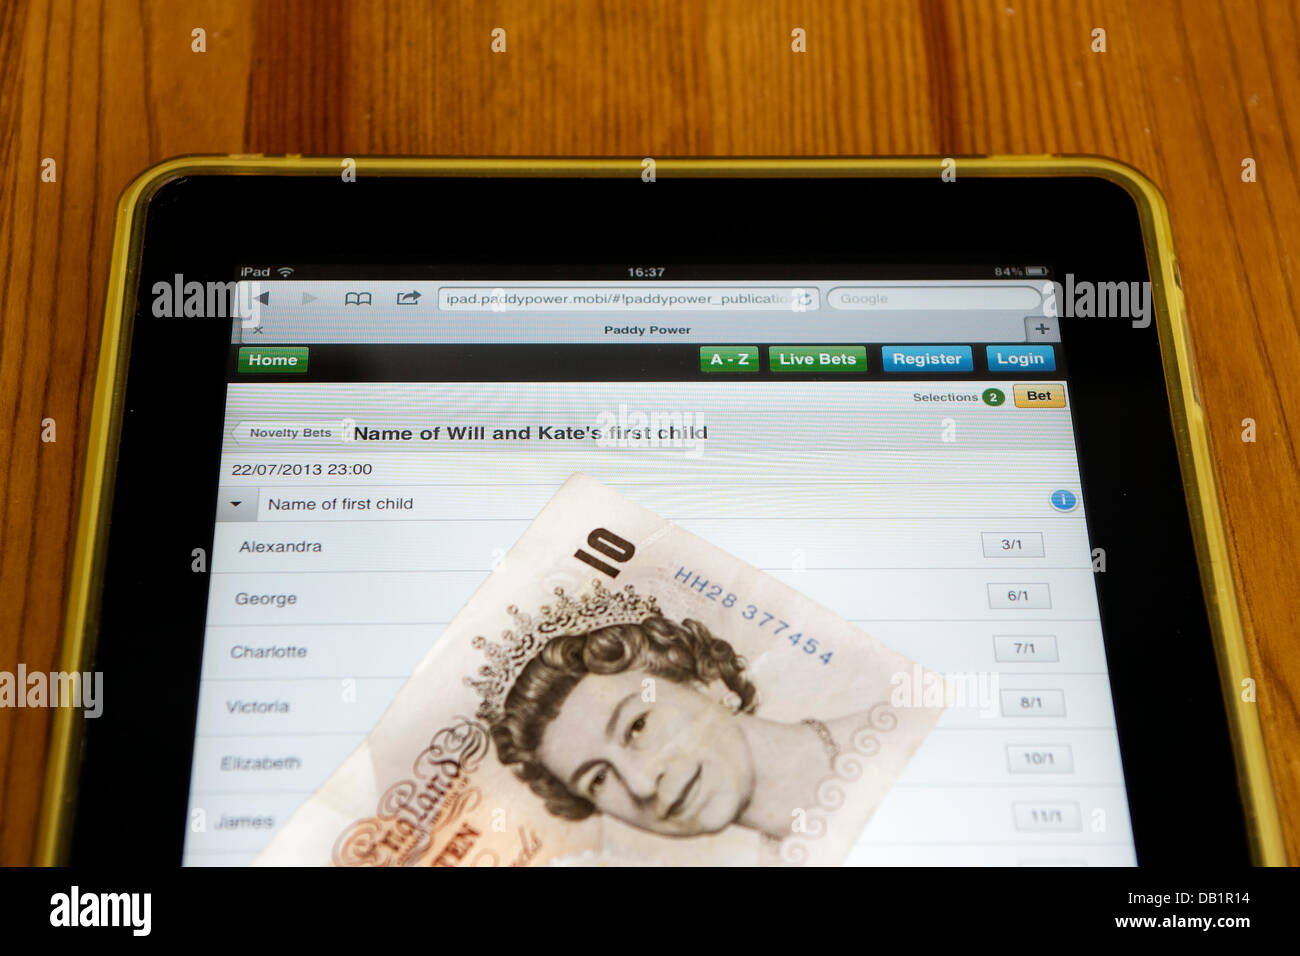 The betting prices listed on the paddypower online betting website for various possible names for the new royal baby are shown being viewed on an i pad. Stock Photo